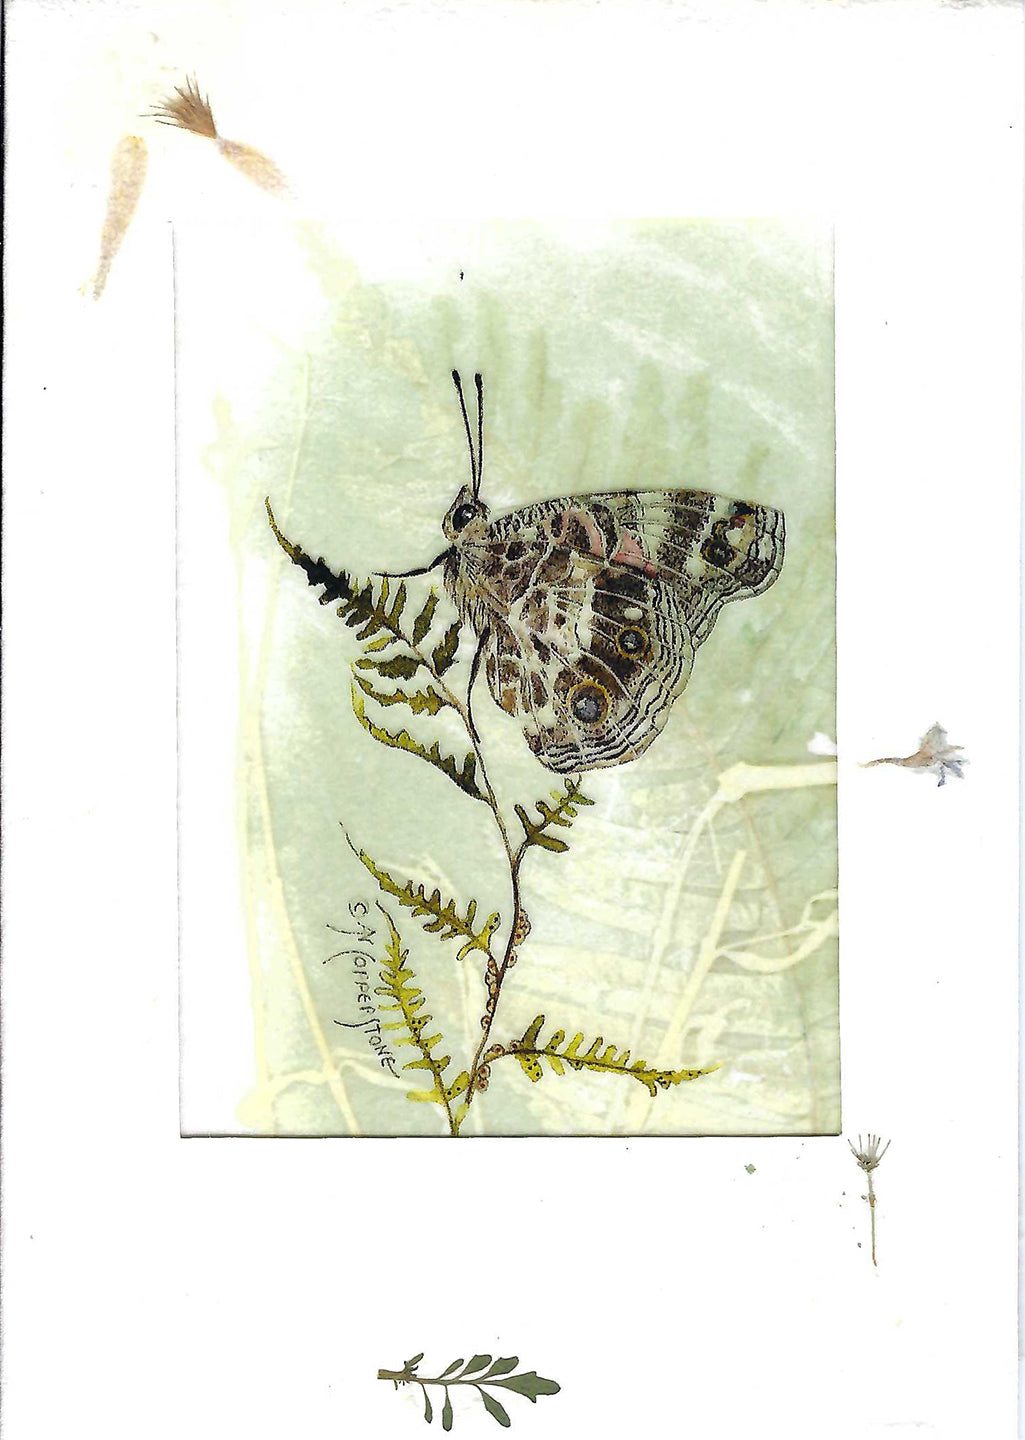 Painted Lady. Blank greeting card by Janice A. Copperstone of Milford, Mich.  